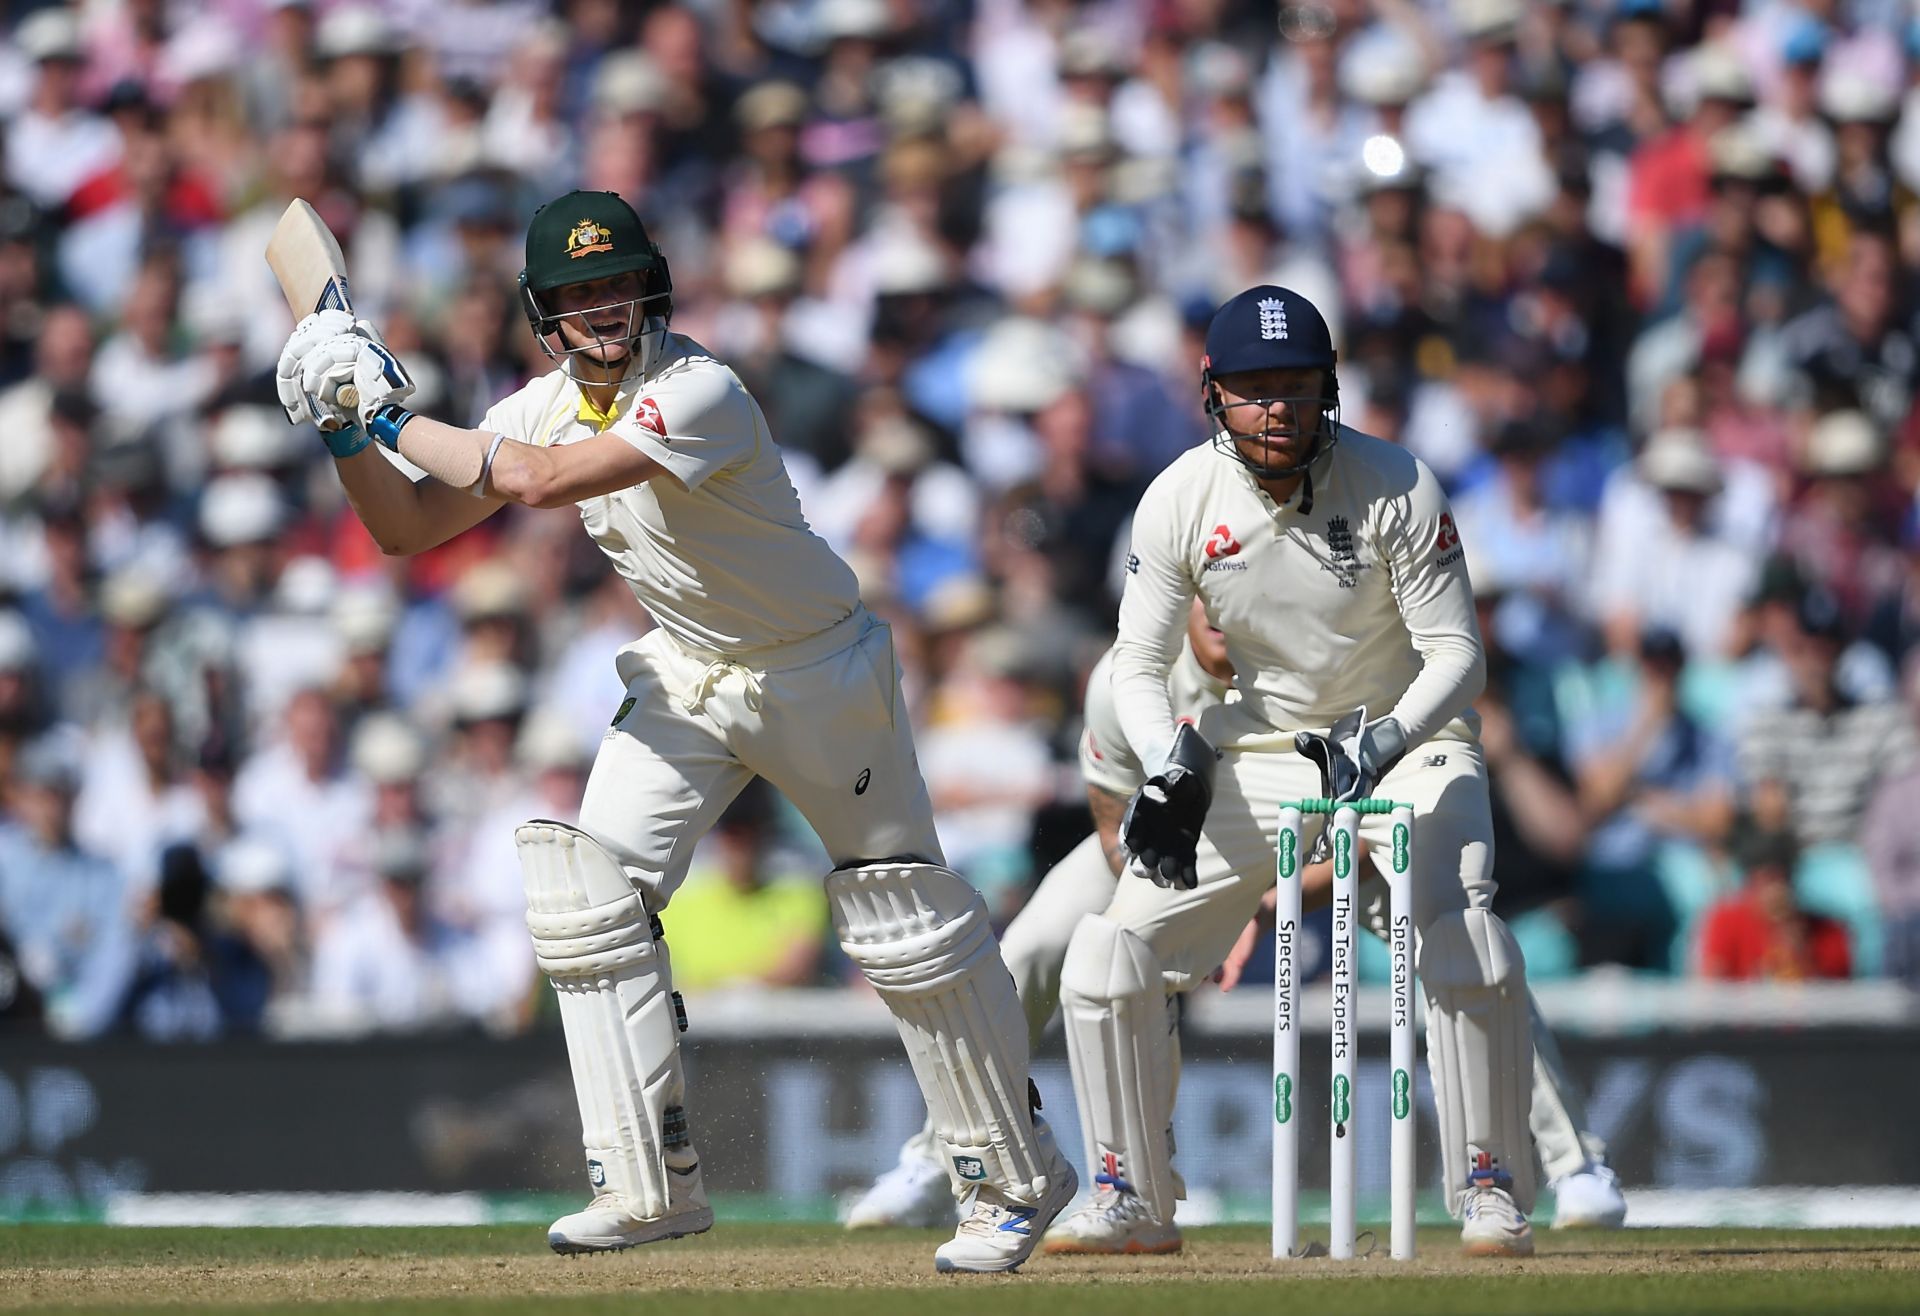 Steve Smith in action during Ashes 2019. Pic: Getty Images